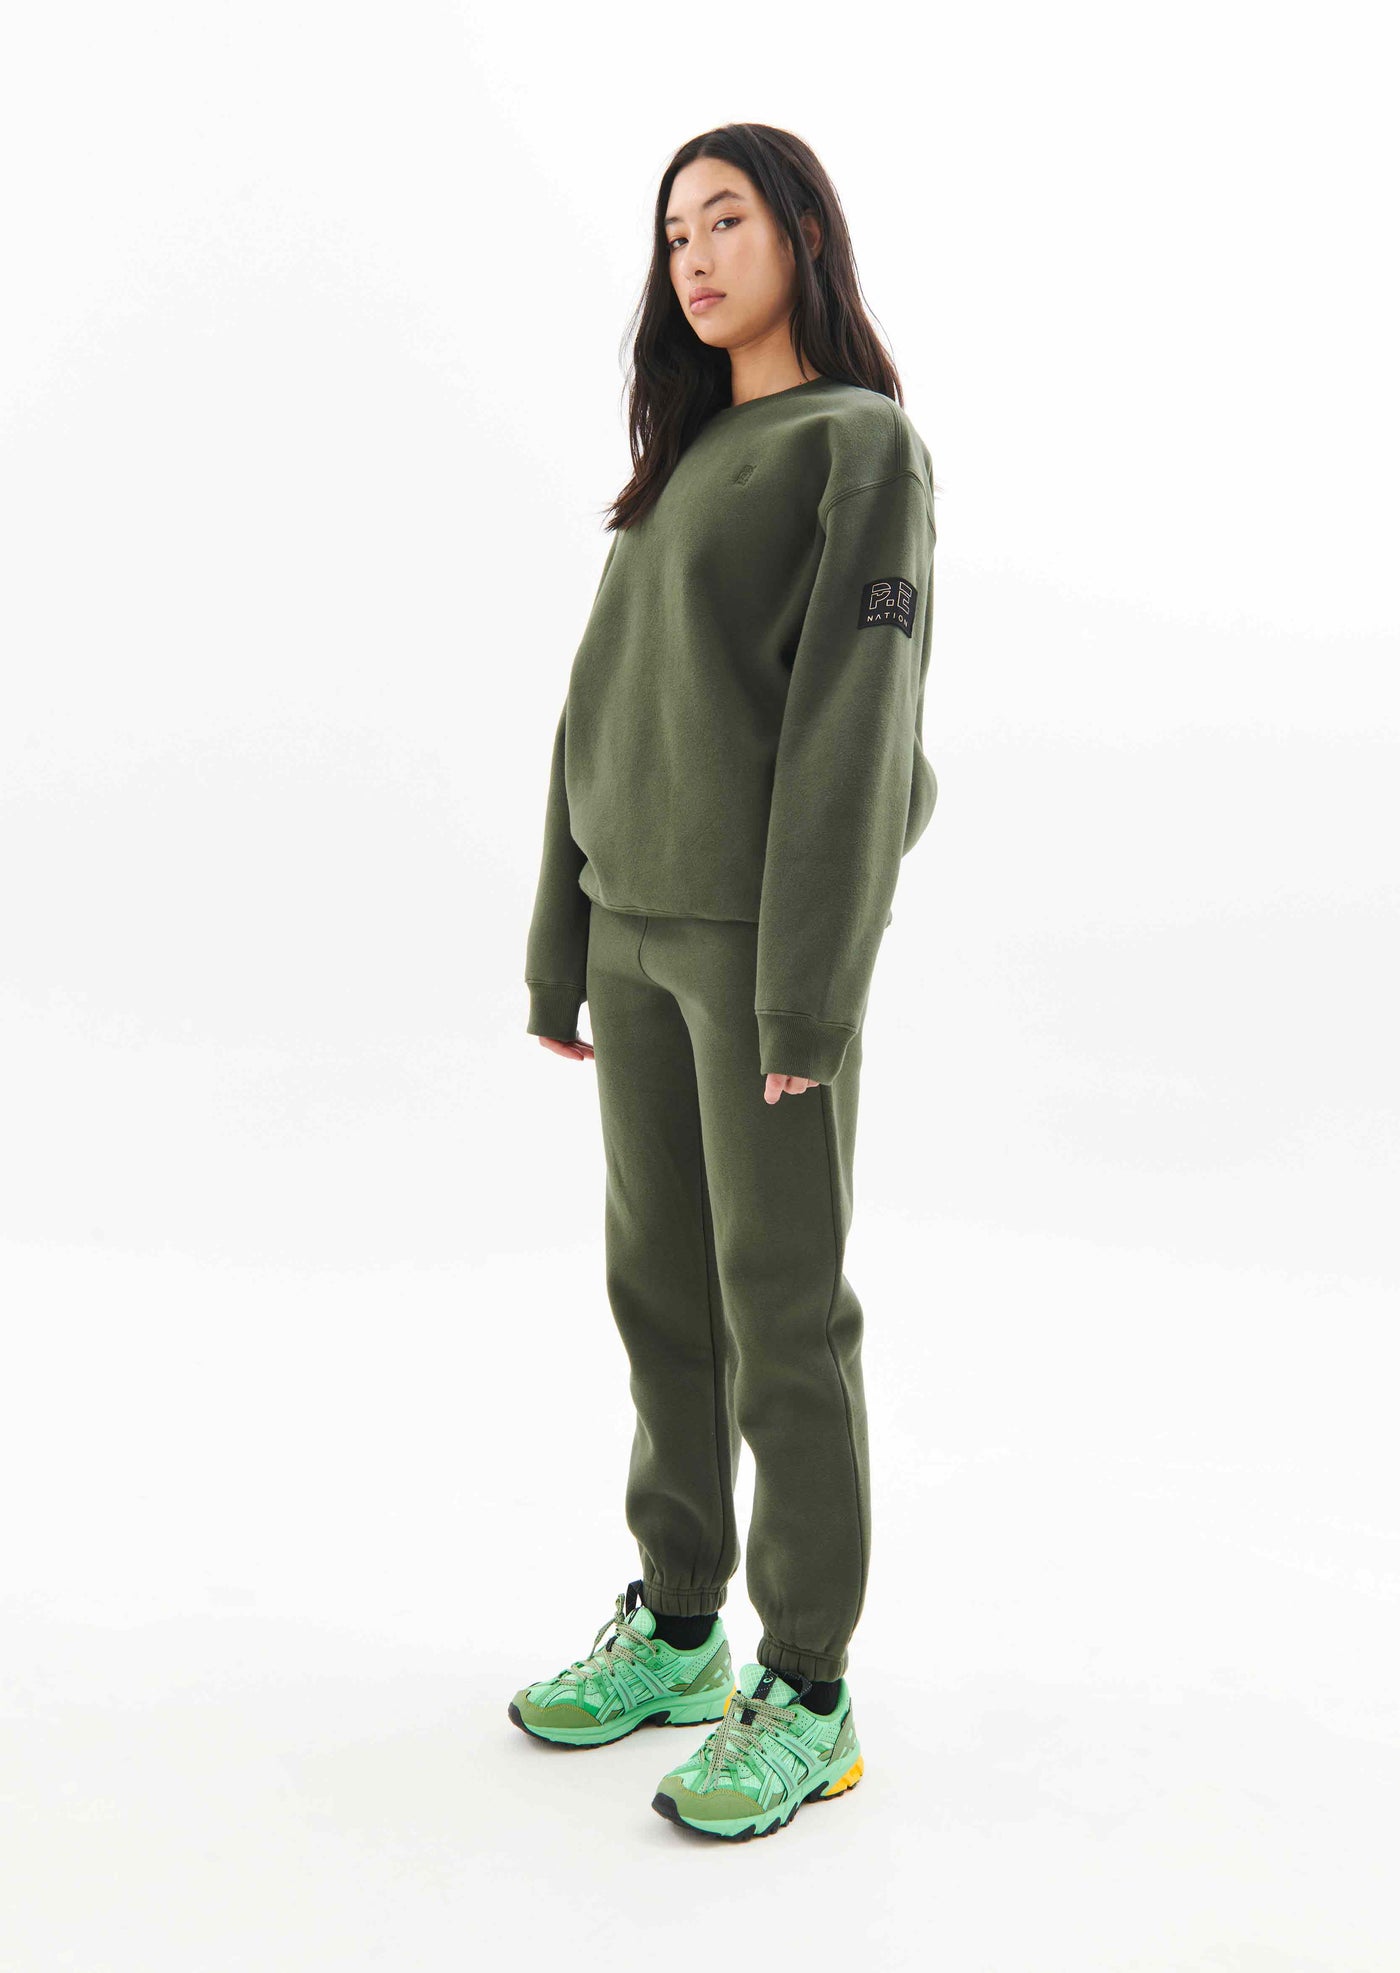 PRIMARY TRACKPANT IN RIFLE GREEN